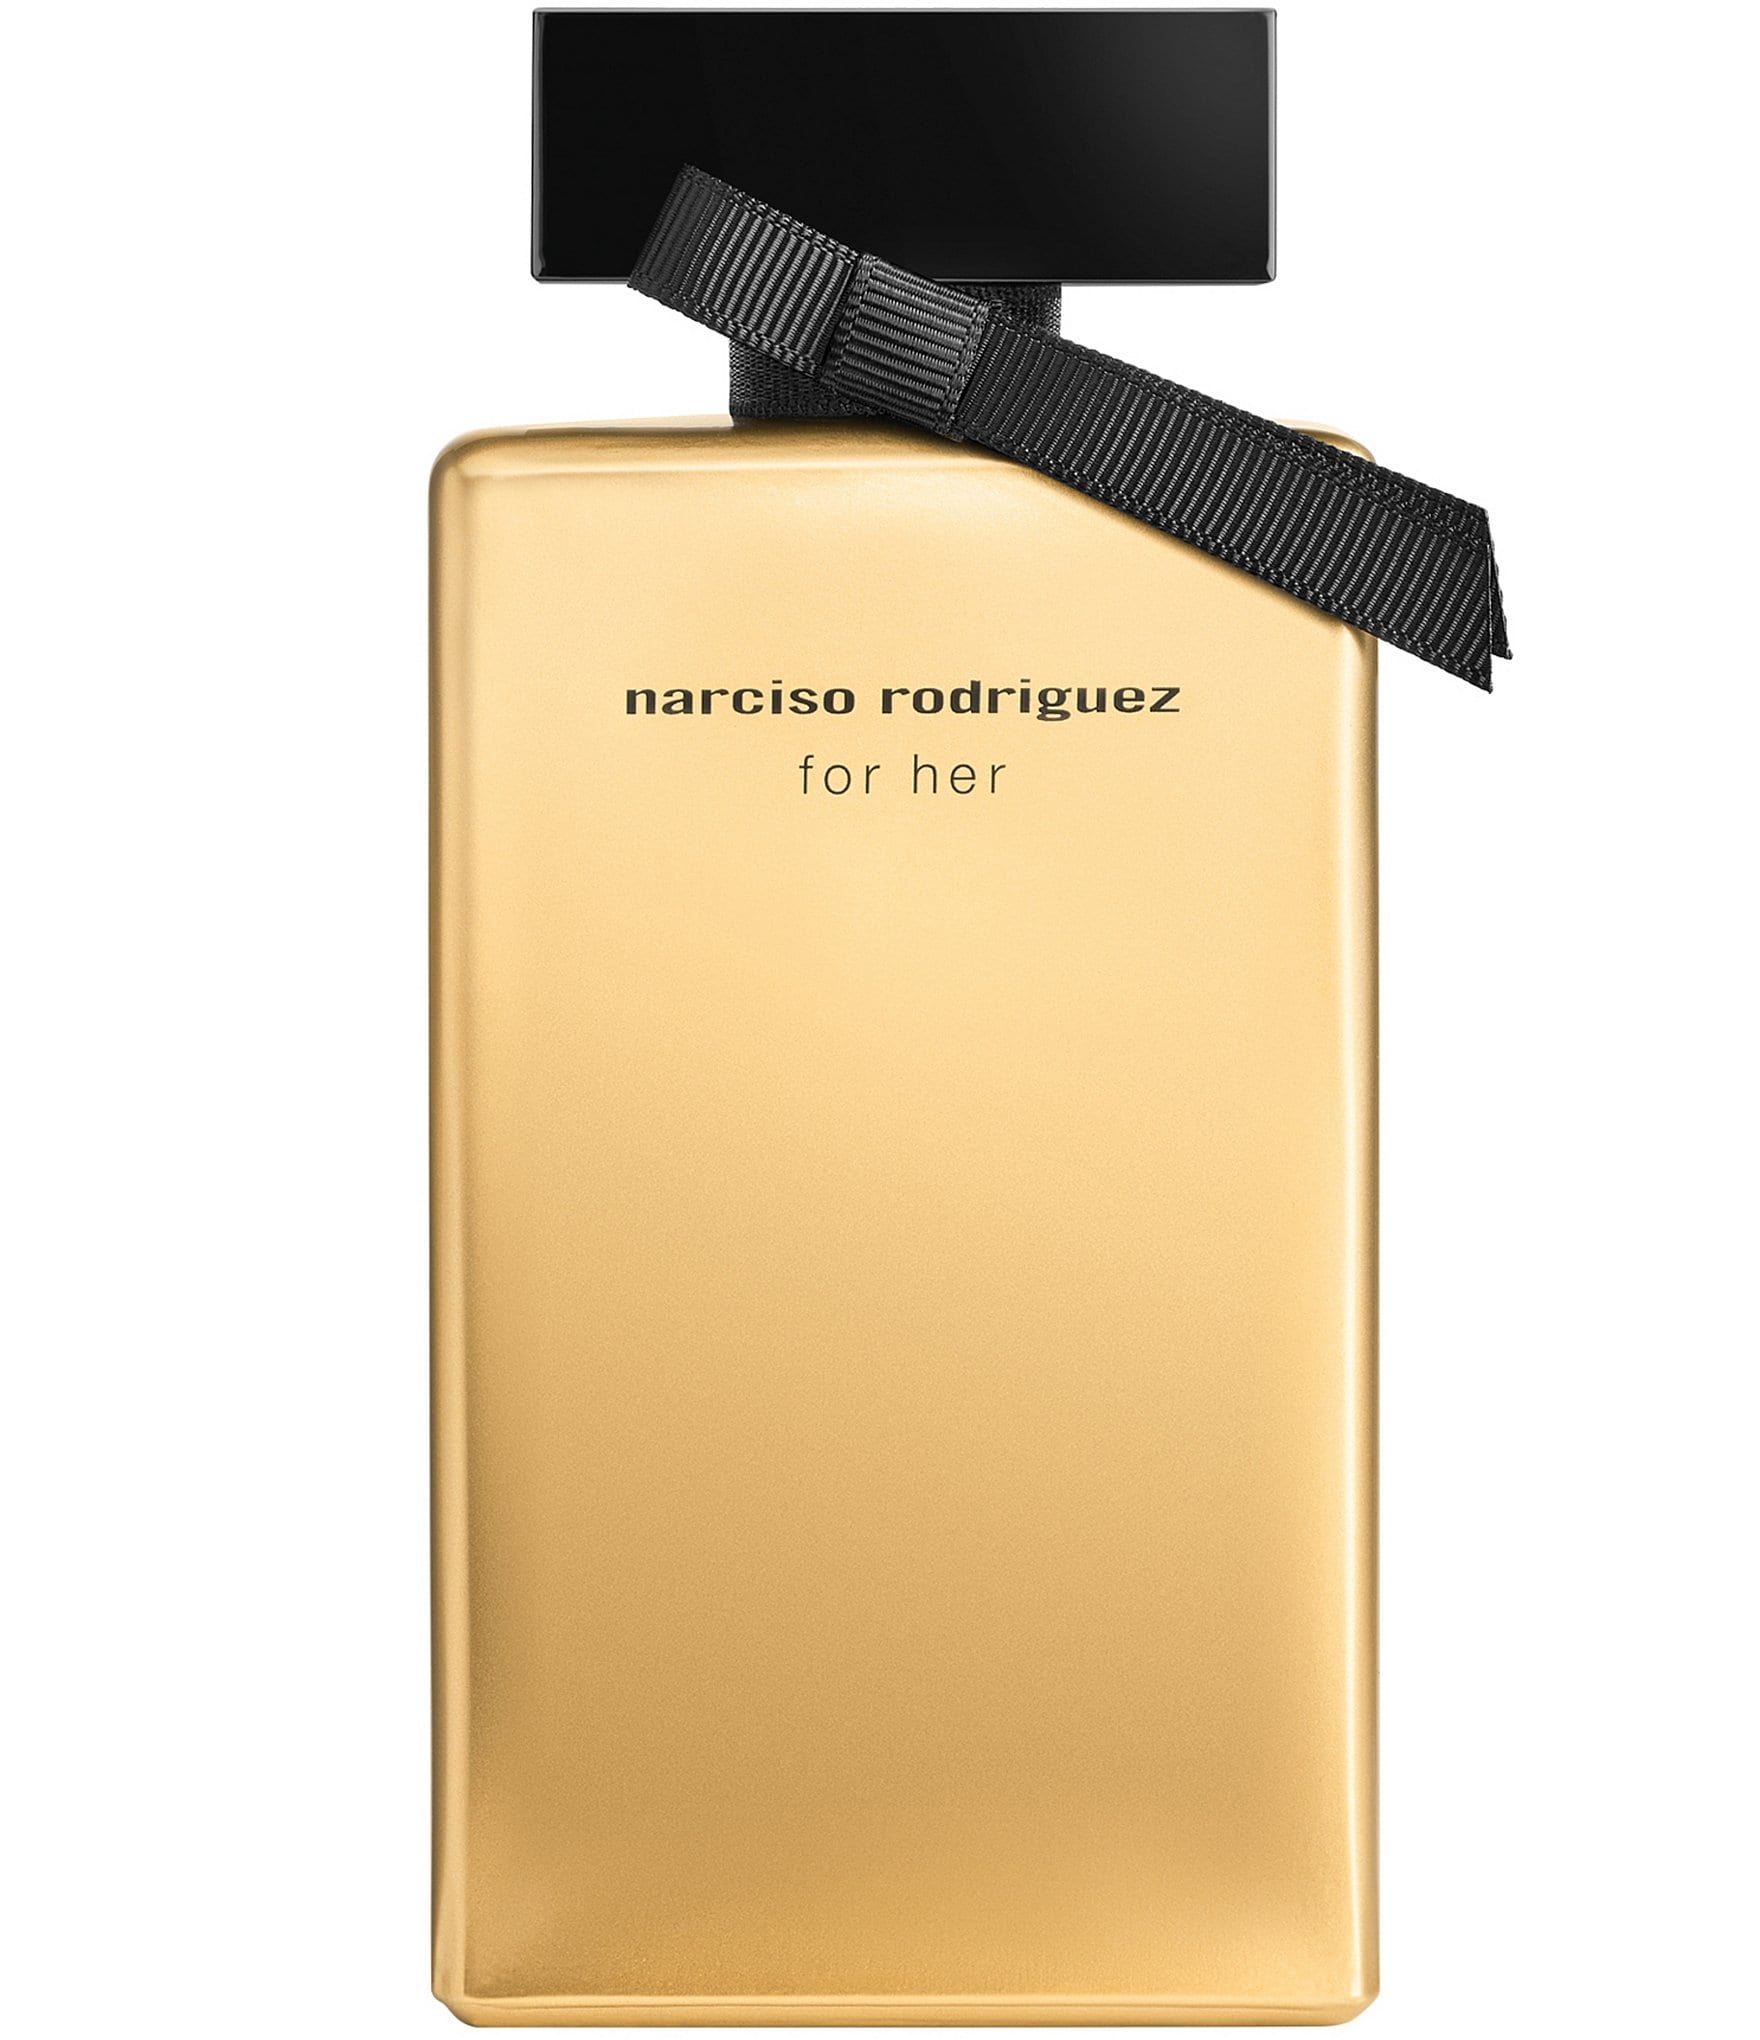 Romantiek honing perspectief Narciso Rodriguez For Her Limited Edition Eau de Toilette | Dillard's